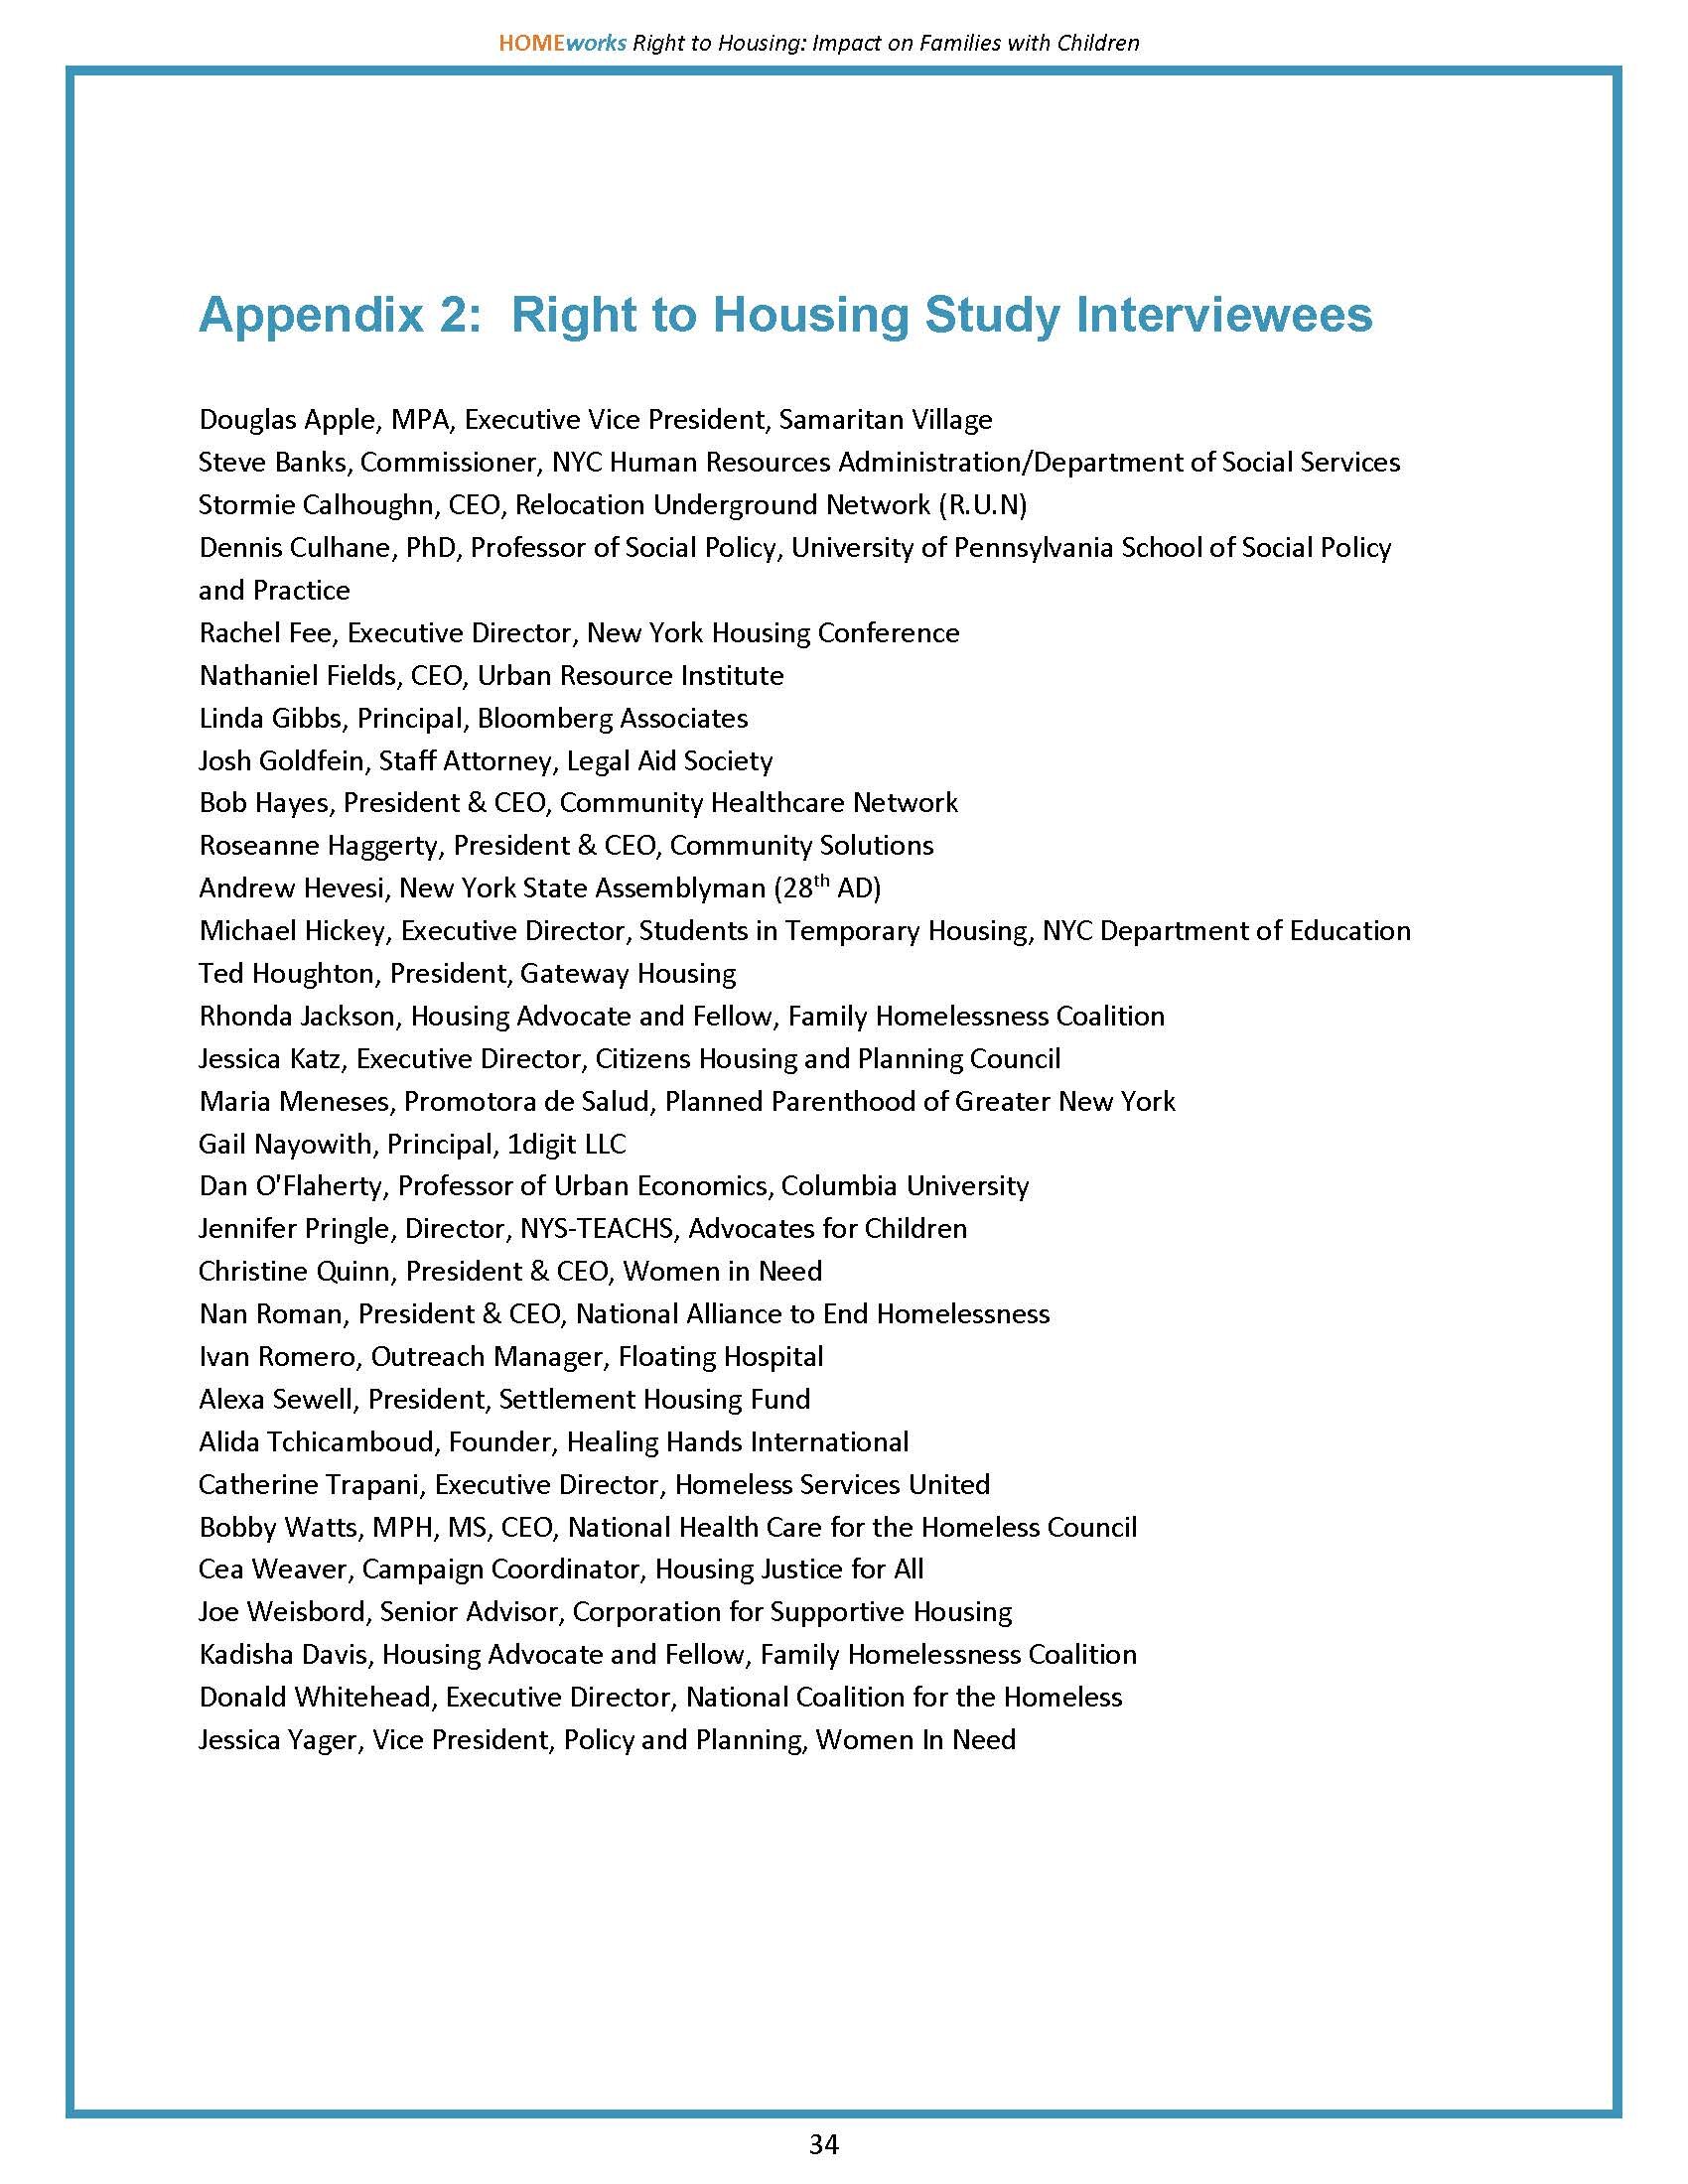 Right to Housing final 9-8-21 (1) (1)_Page_38.jpg